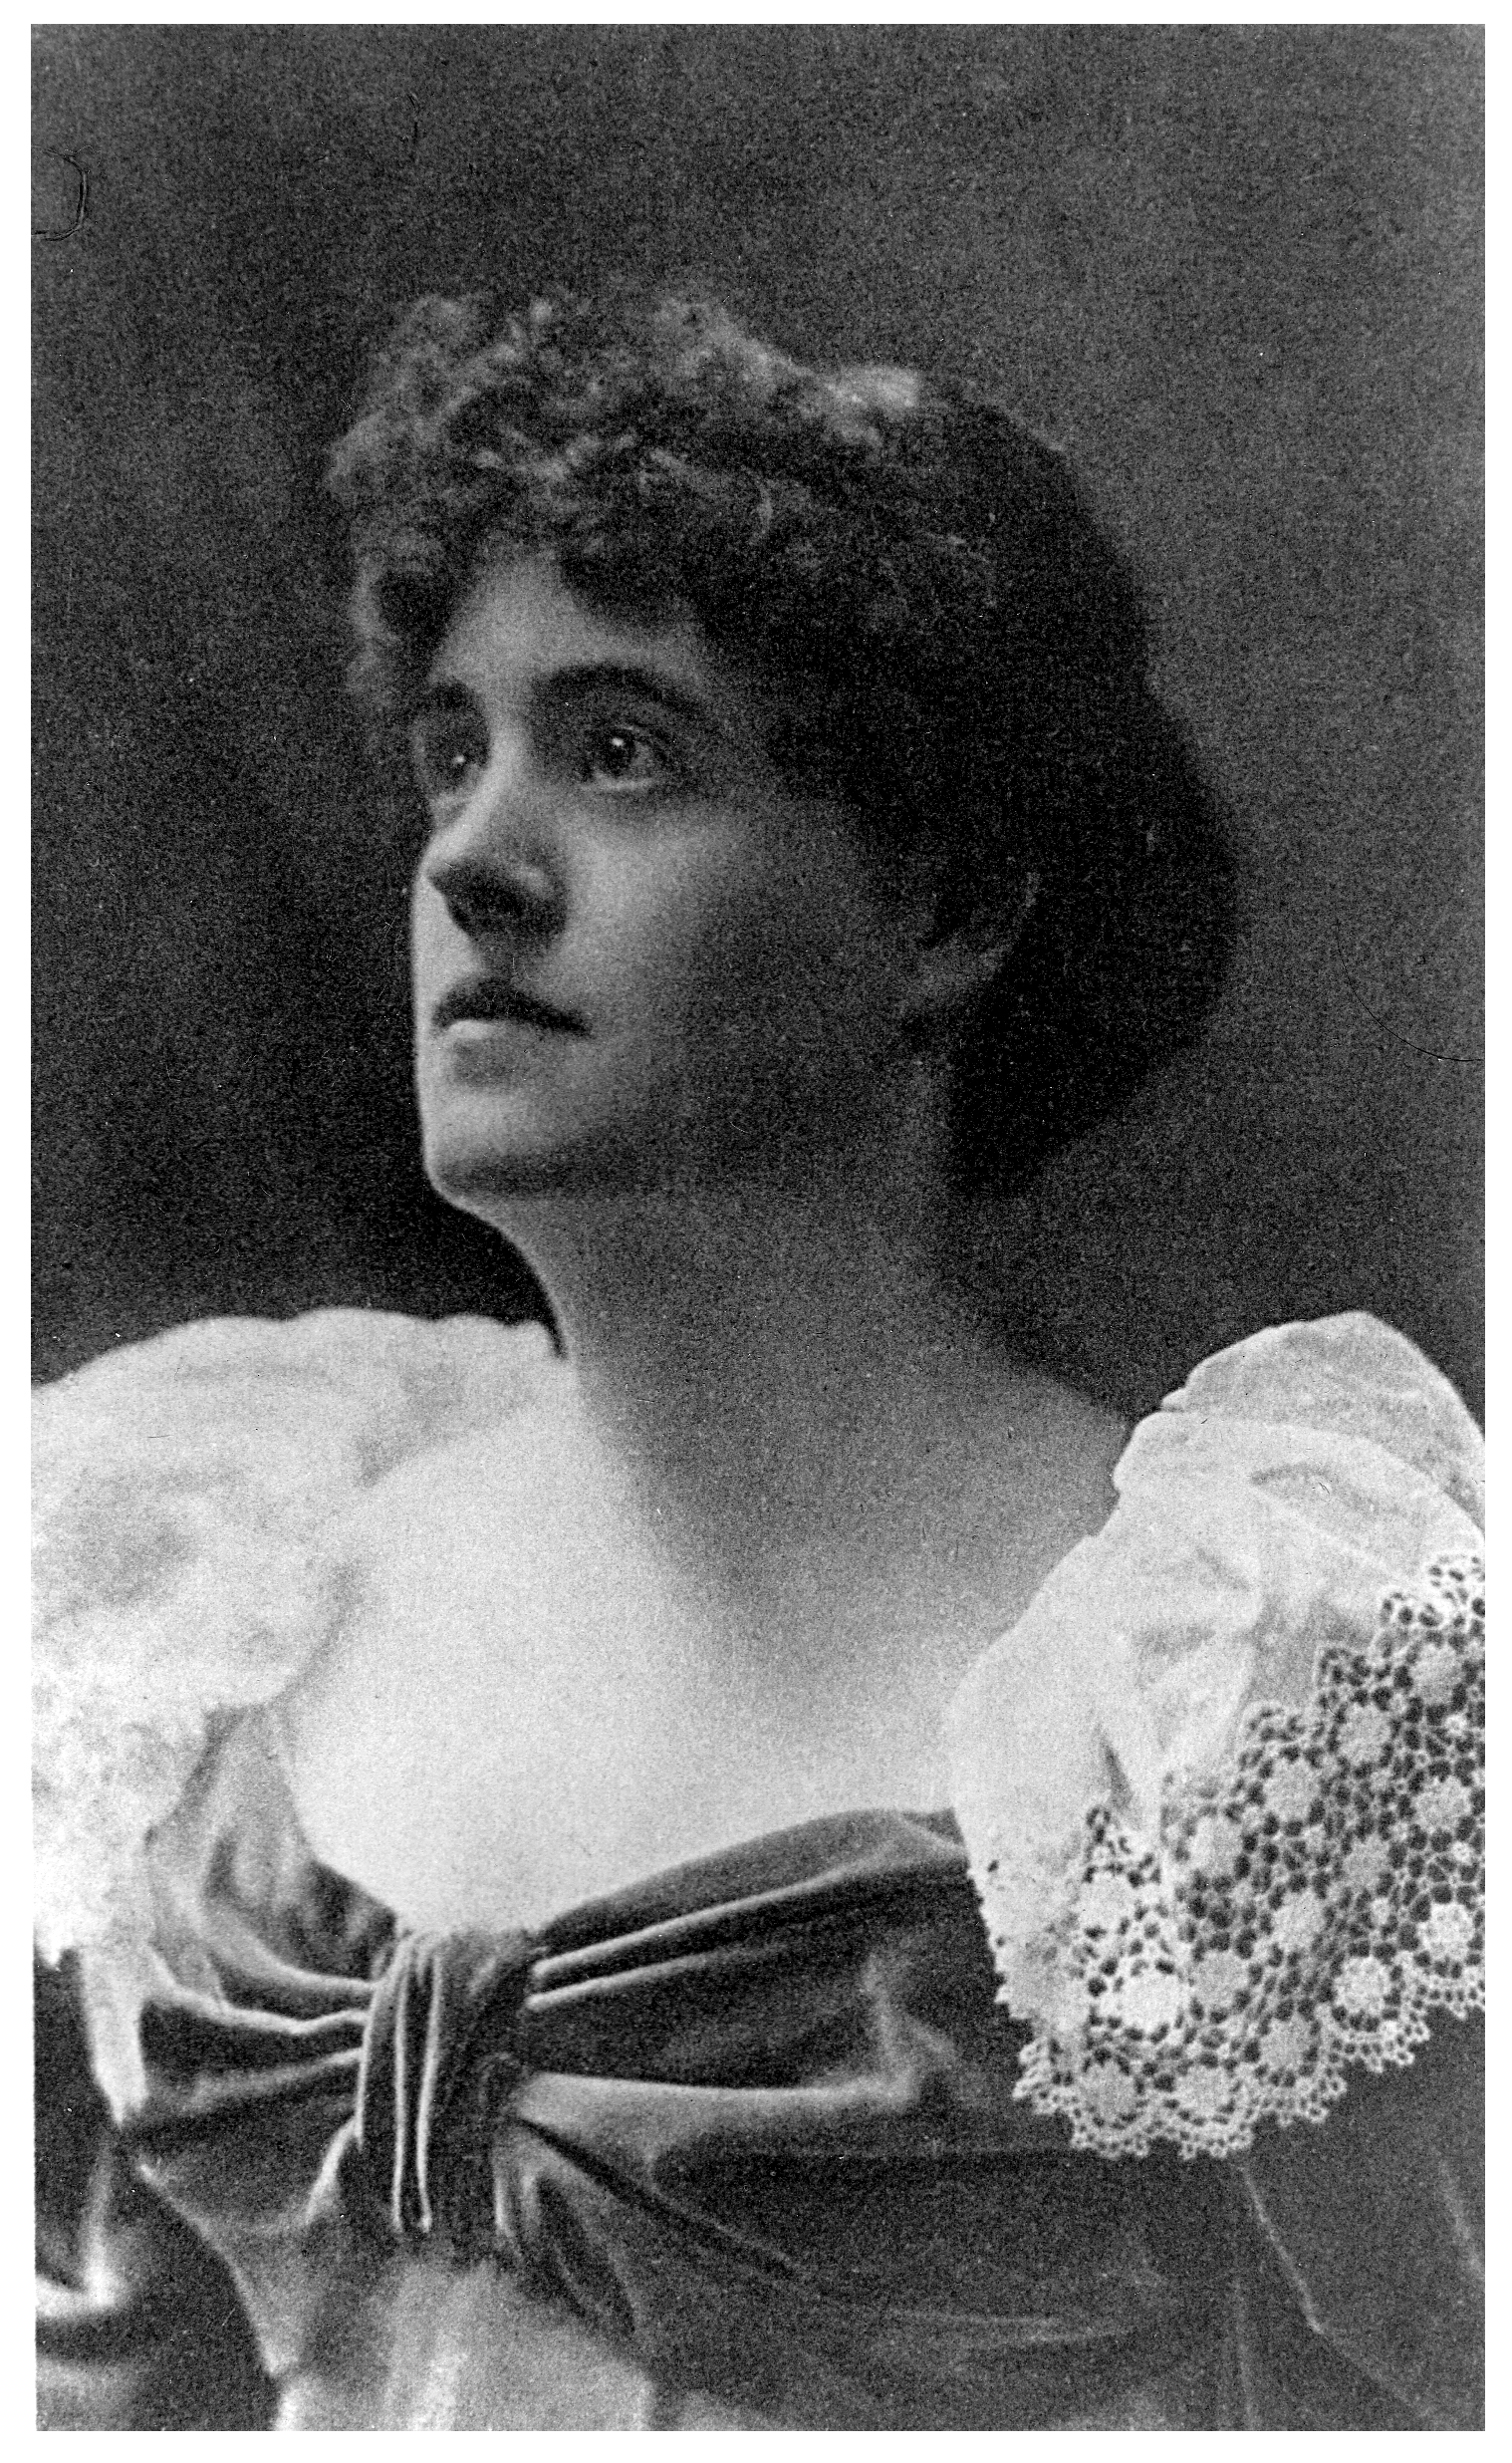 Image is a photograph of Graham Tomson [Rosamund Marriott Watson] shown from the chest up. She is in ¾ face, looking towards the upper left corner of the image. She has curly hair that is worn short. She is wearing a dress with a low neckline; the fabric gathers in a bow in the middle of her chest. The dress has long sleeves accentuated with white lace shoulders. The background is open and dark-coloured. The image is vertically displayed.